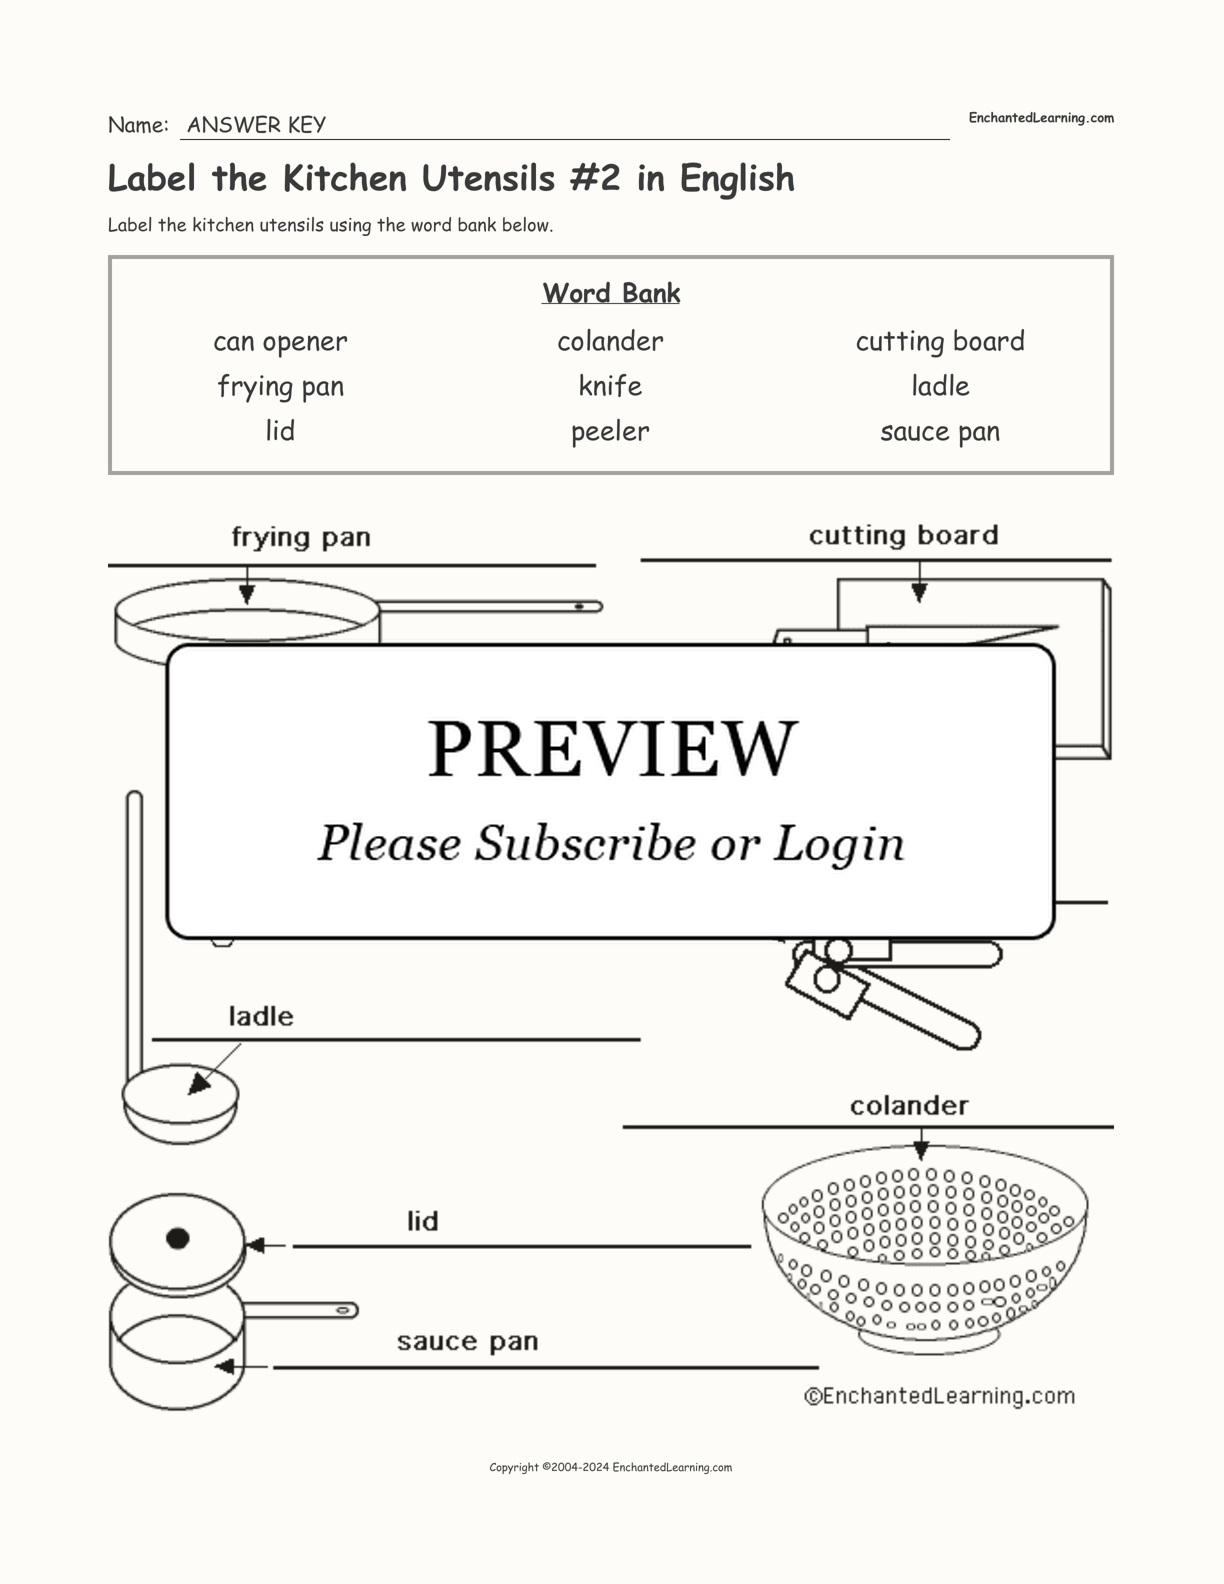 Label the Kitchen Utensils #2 in English interactive worksheet page 2